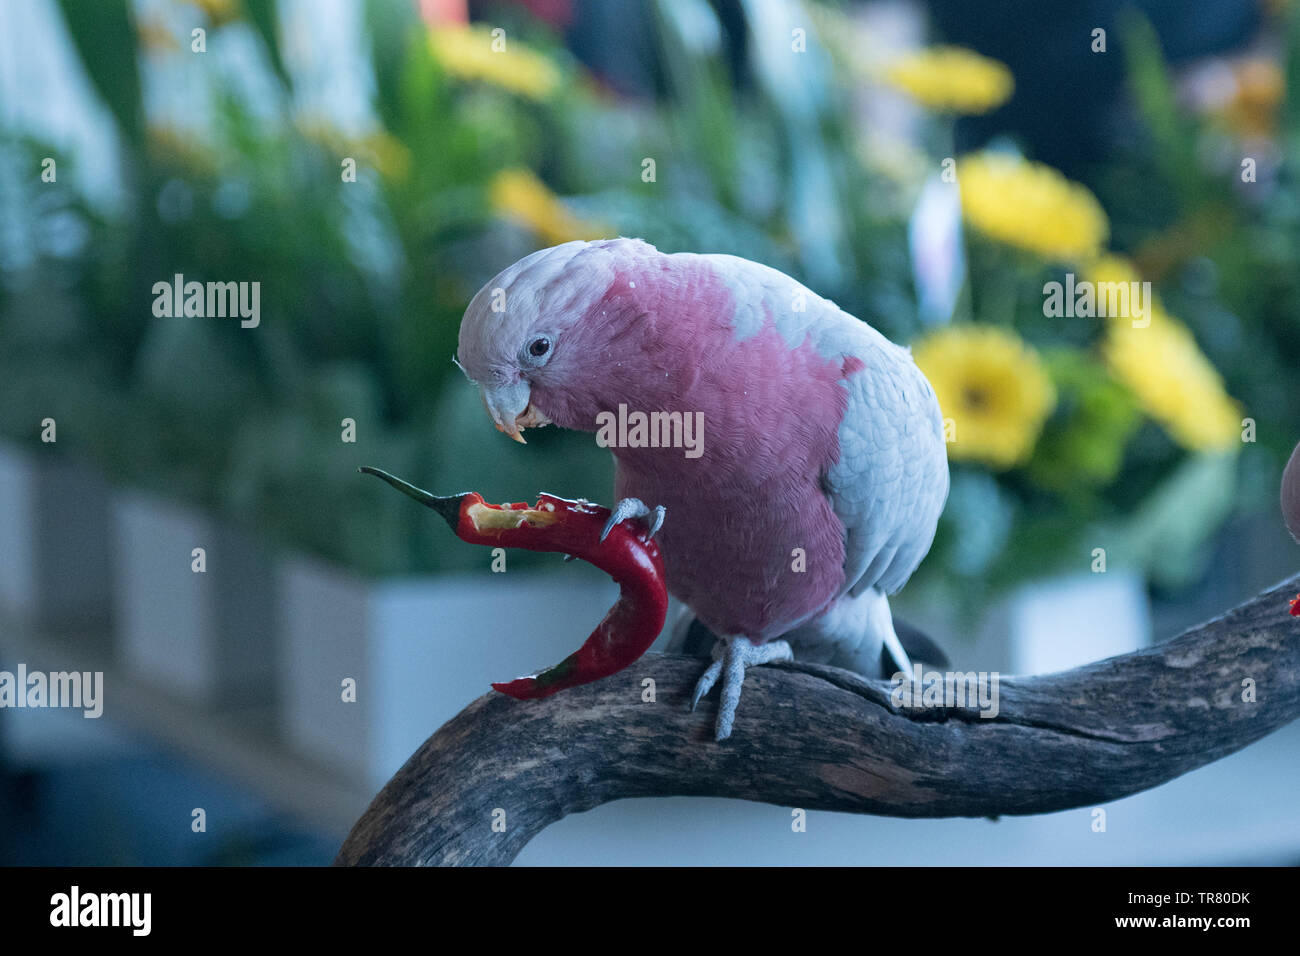 A rescued Pink and Grey Galah (Eolophus roseicapilla), an Australian bird, eating seeds from a chili. Stock Photo